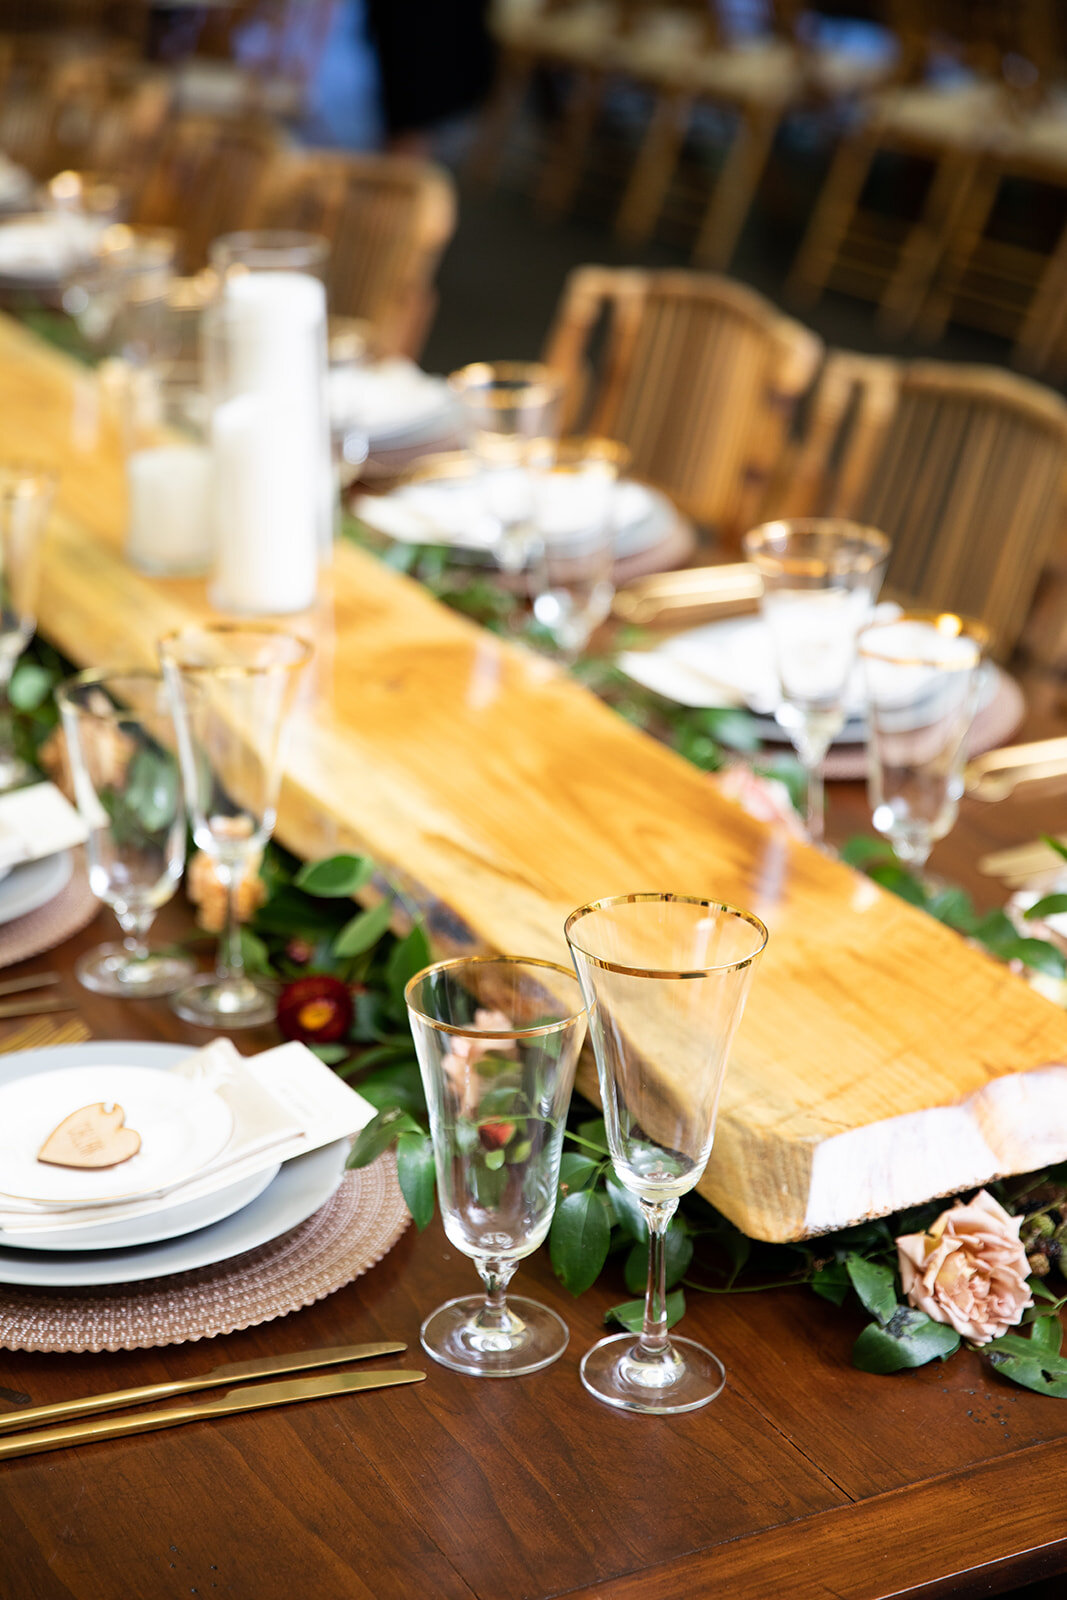 Family style dinner hack: low wooden shelves with flowers, greenery, and fruit peeking out underneath. Nashville and RT Lodge wedding floral design.